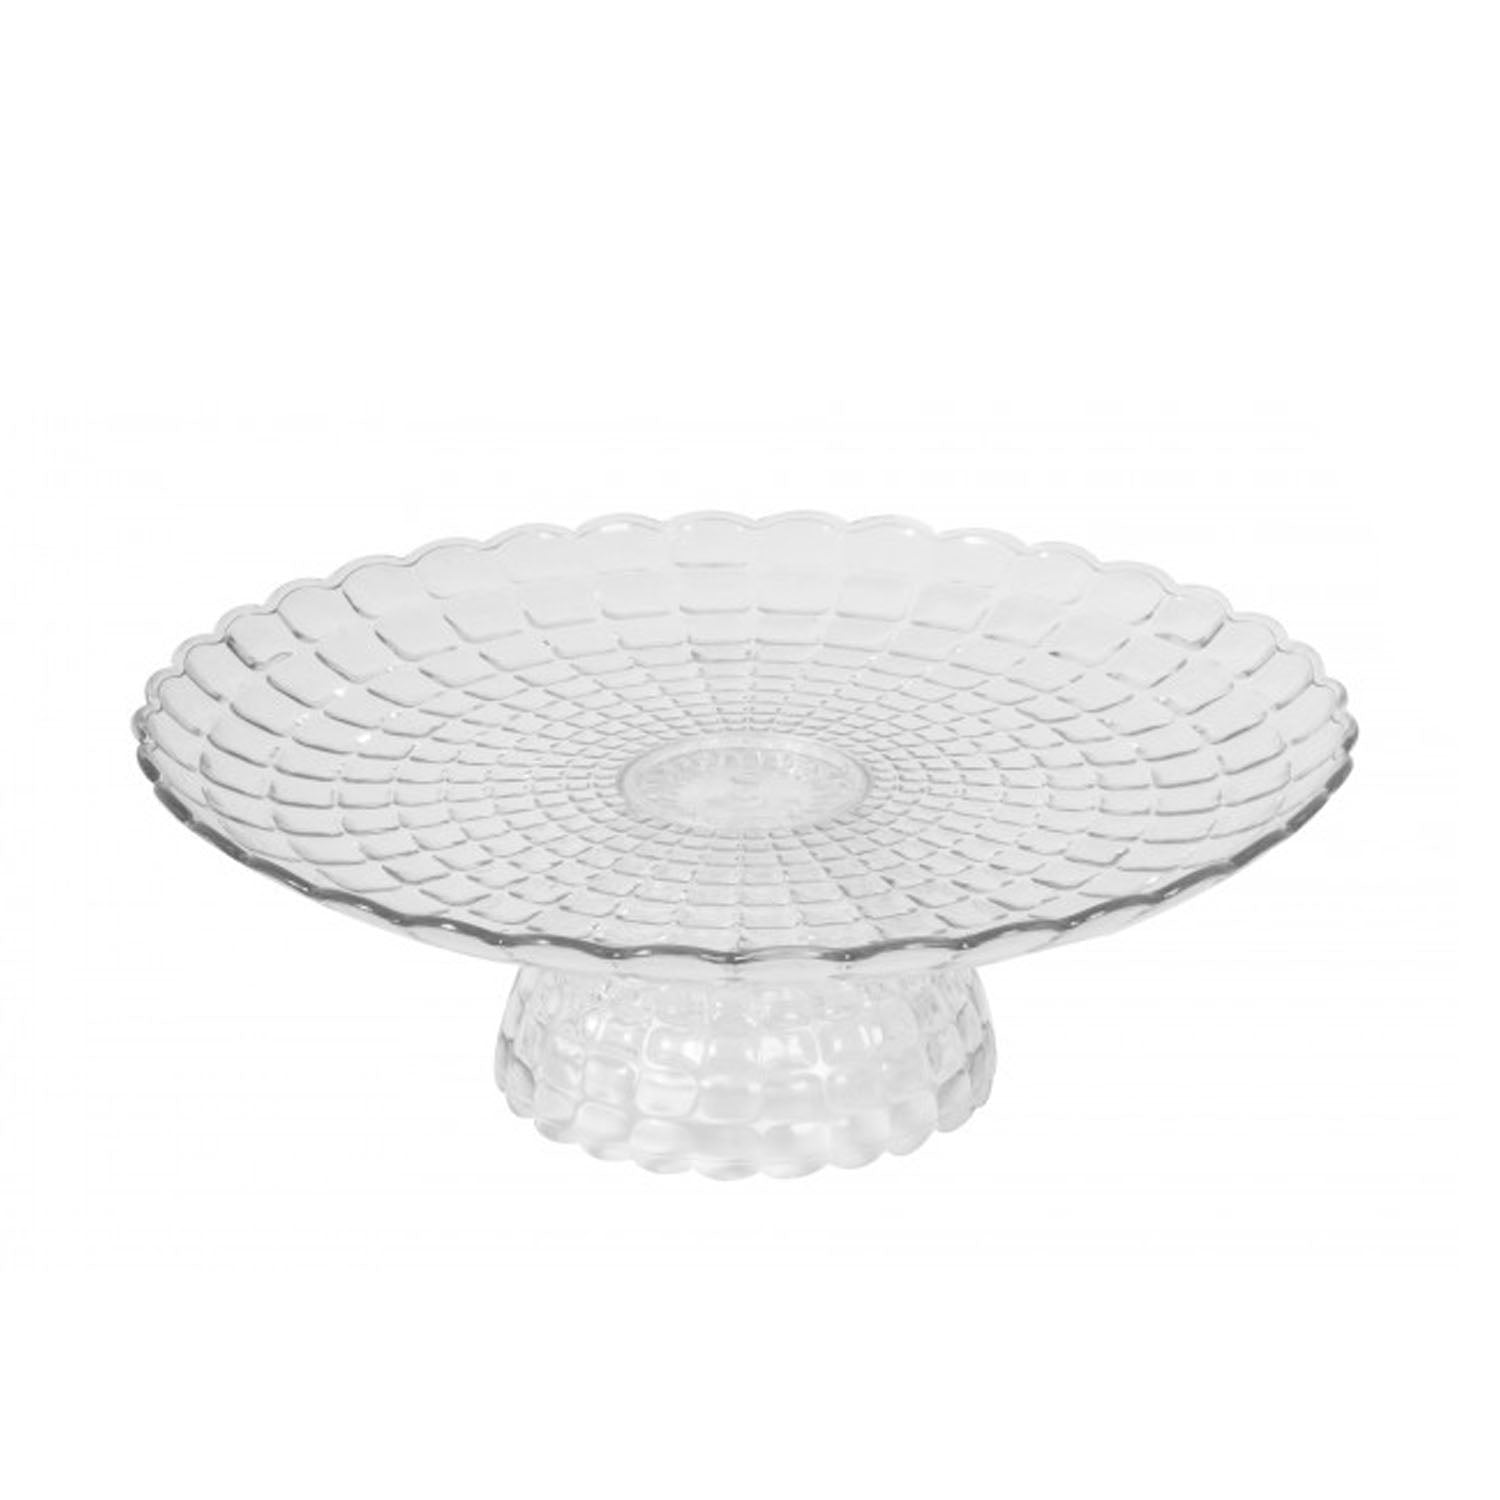 30cm Footed Cake Stand